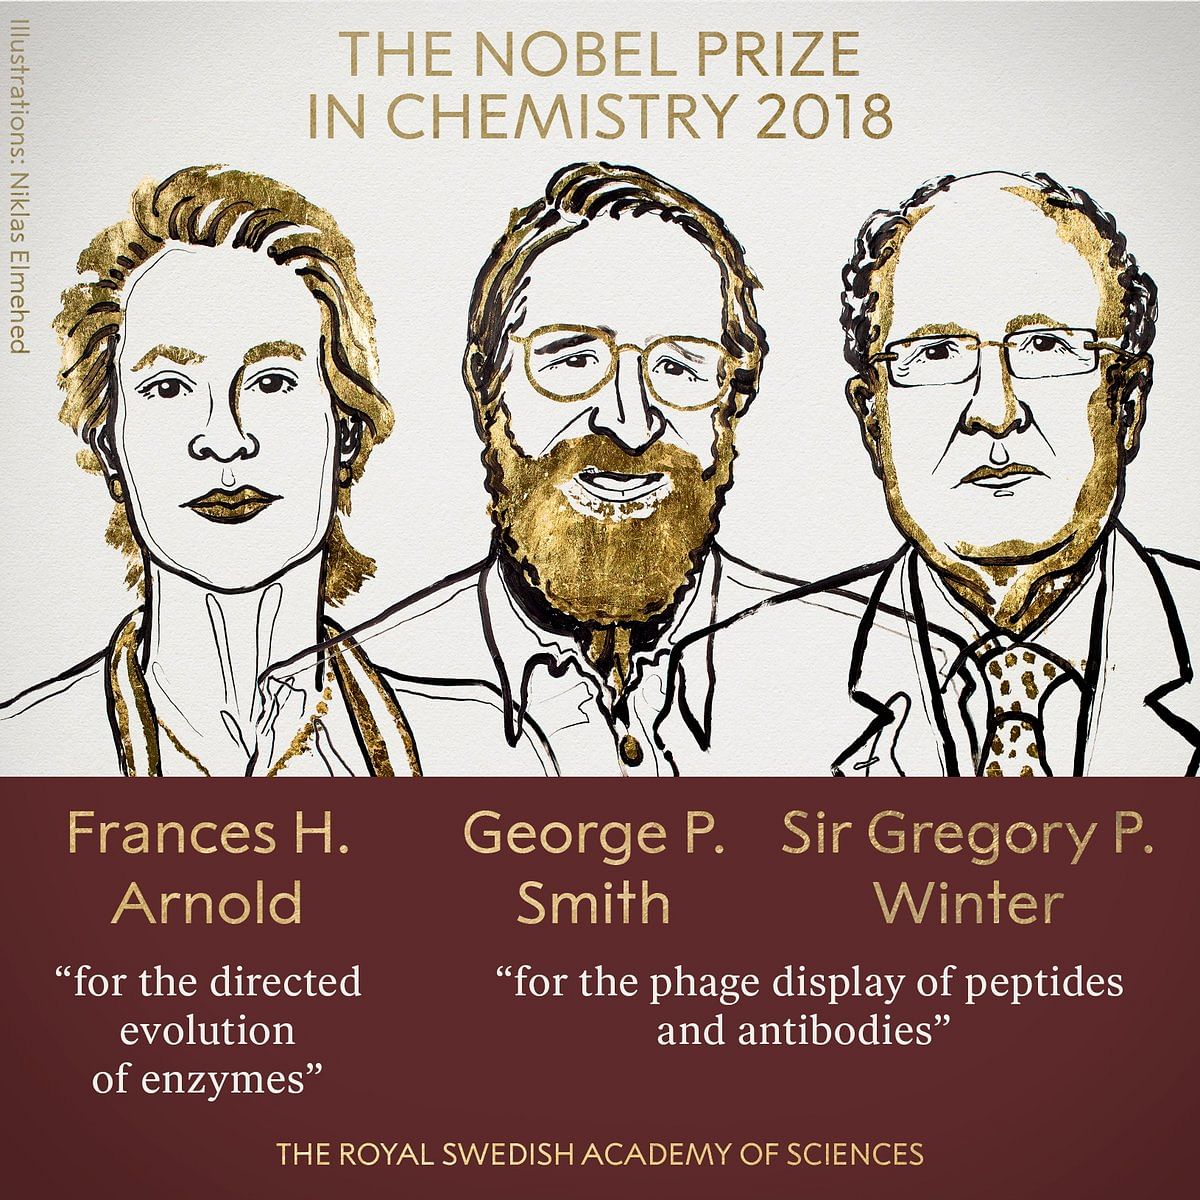 The Nobel Prize  in Chemistry has been awarded to Frances H Arnold , George P Smith and Sir Gregory P Winter.